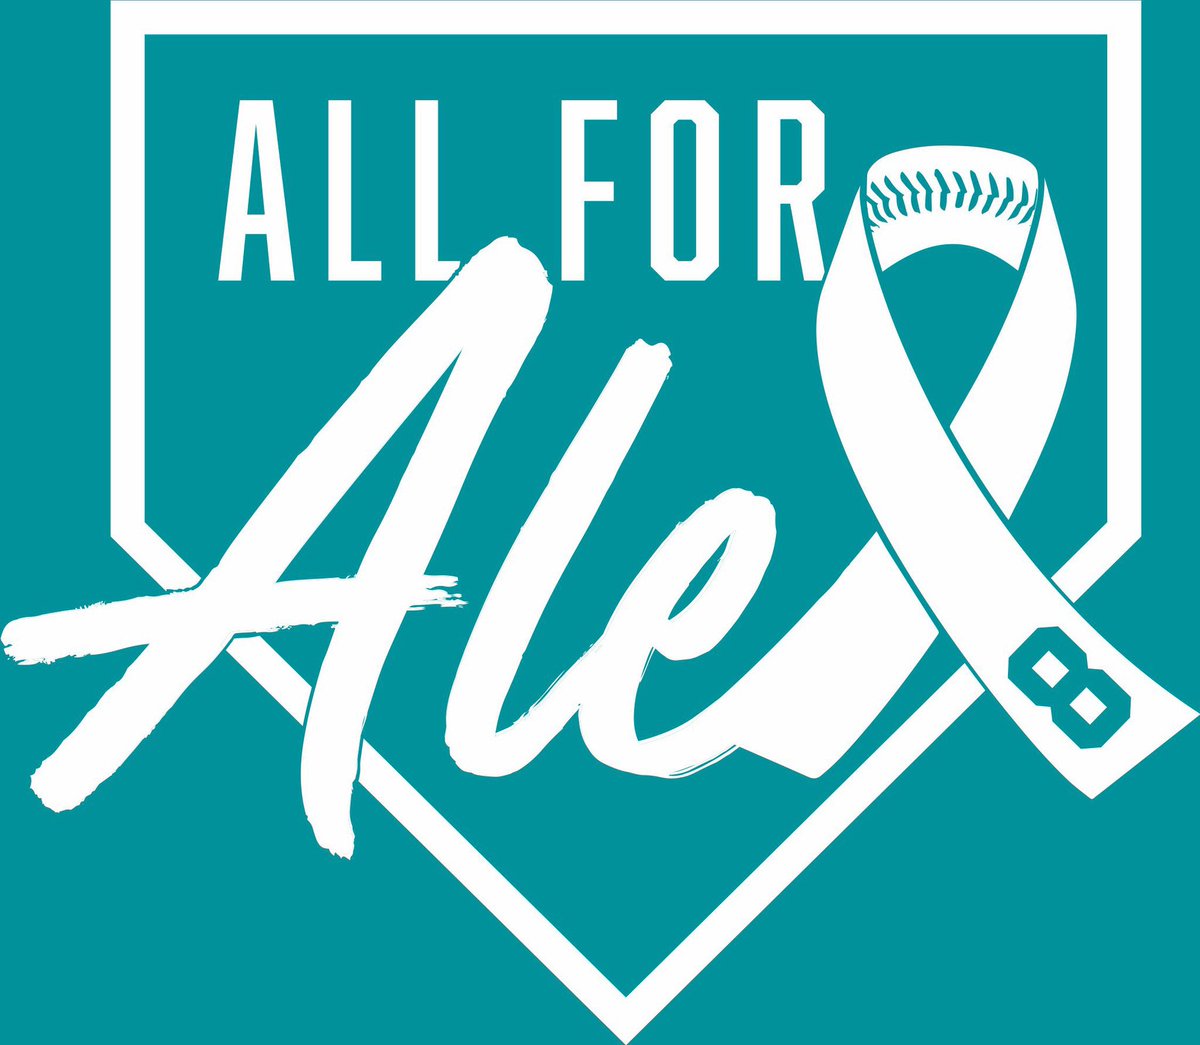 Today we join teams across the country by going teal in honor of Alex Wilcox.

#AllForAlex x #NoOneFightsAlone🦋